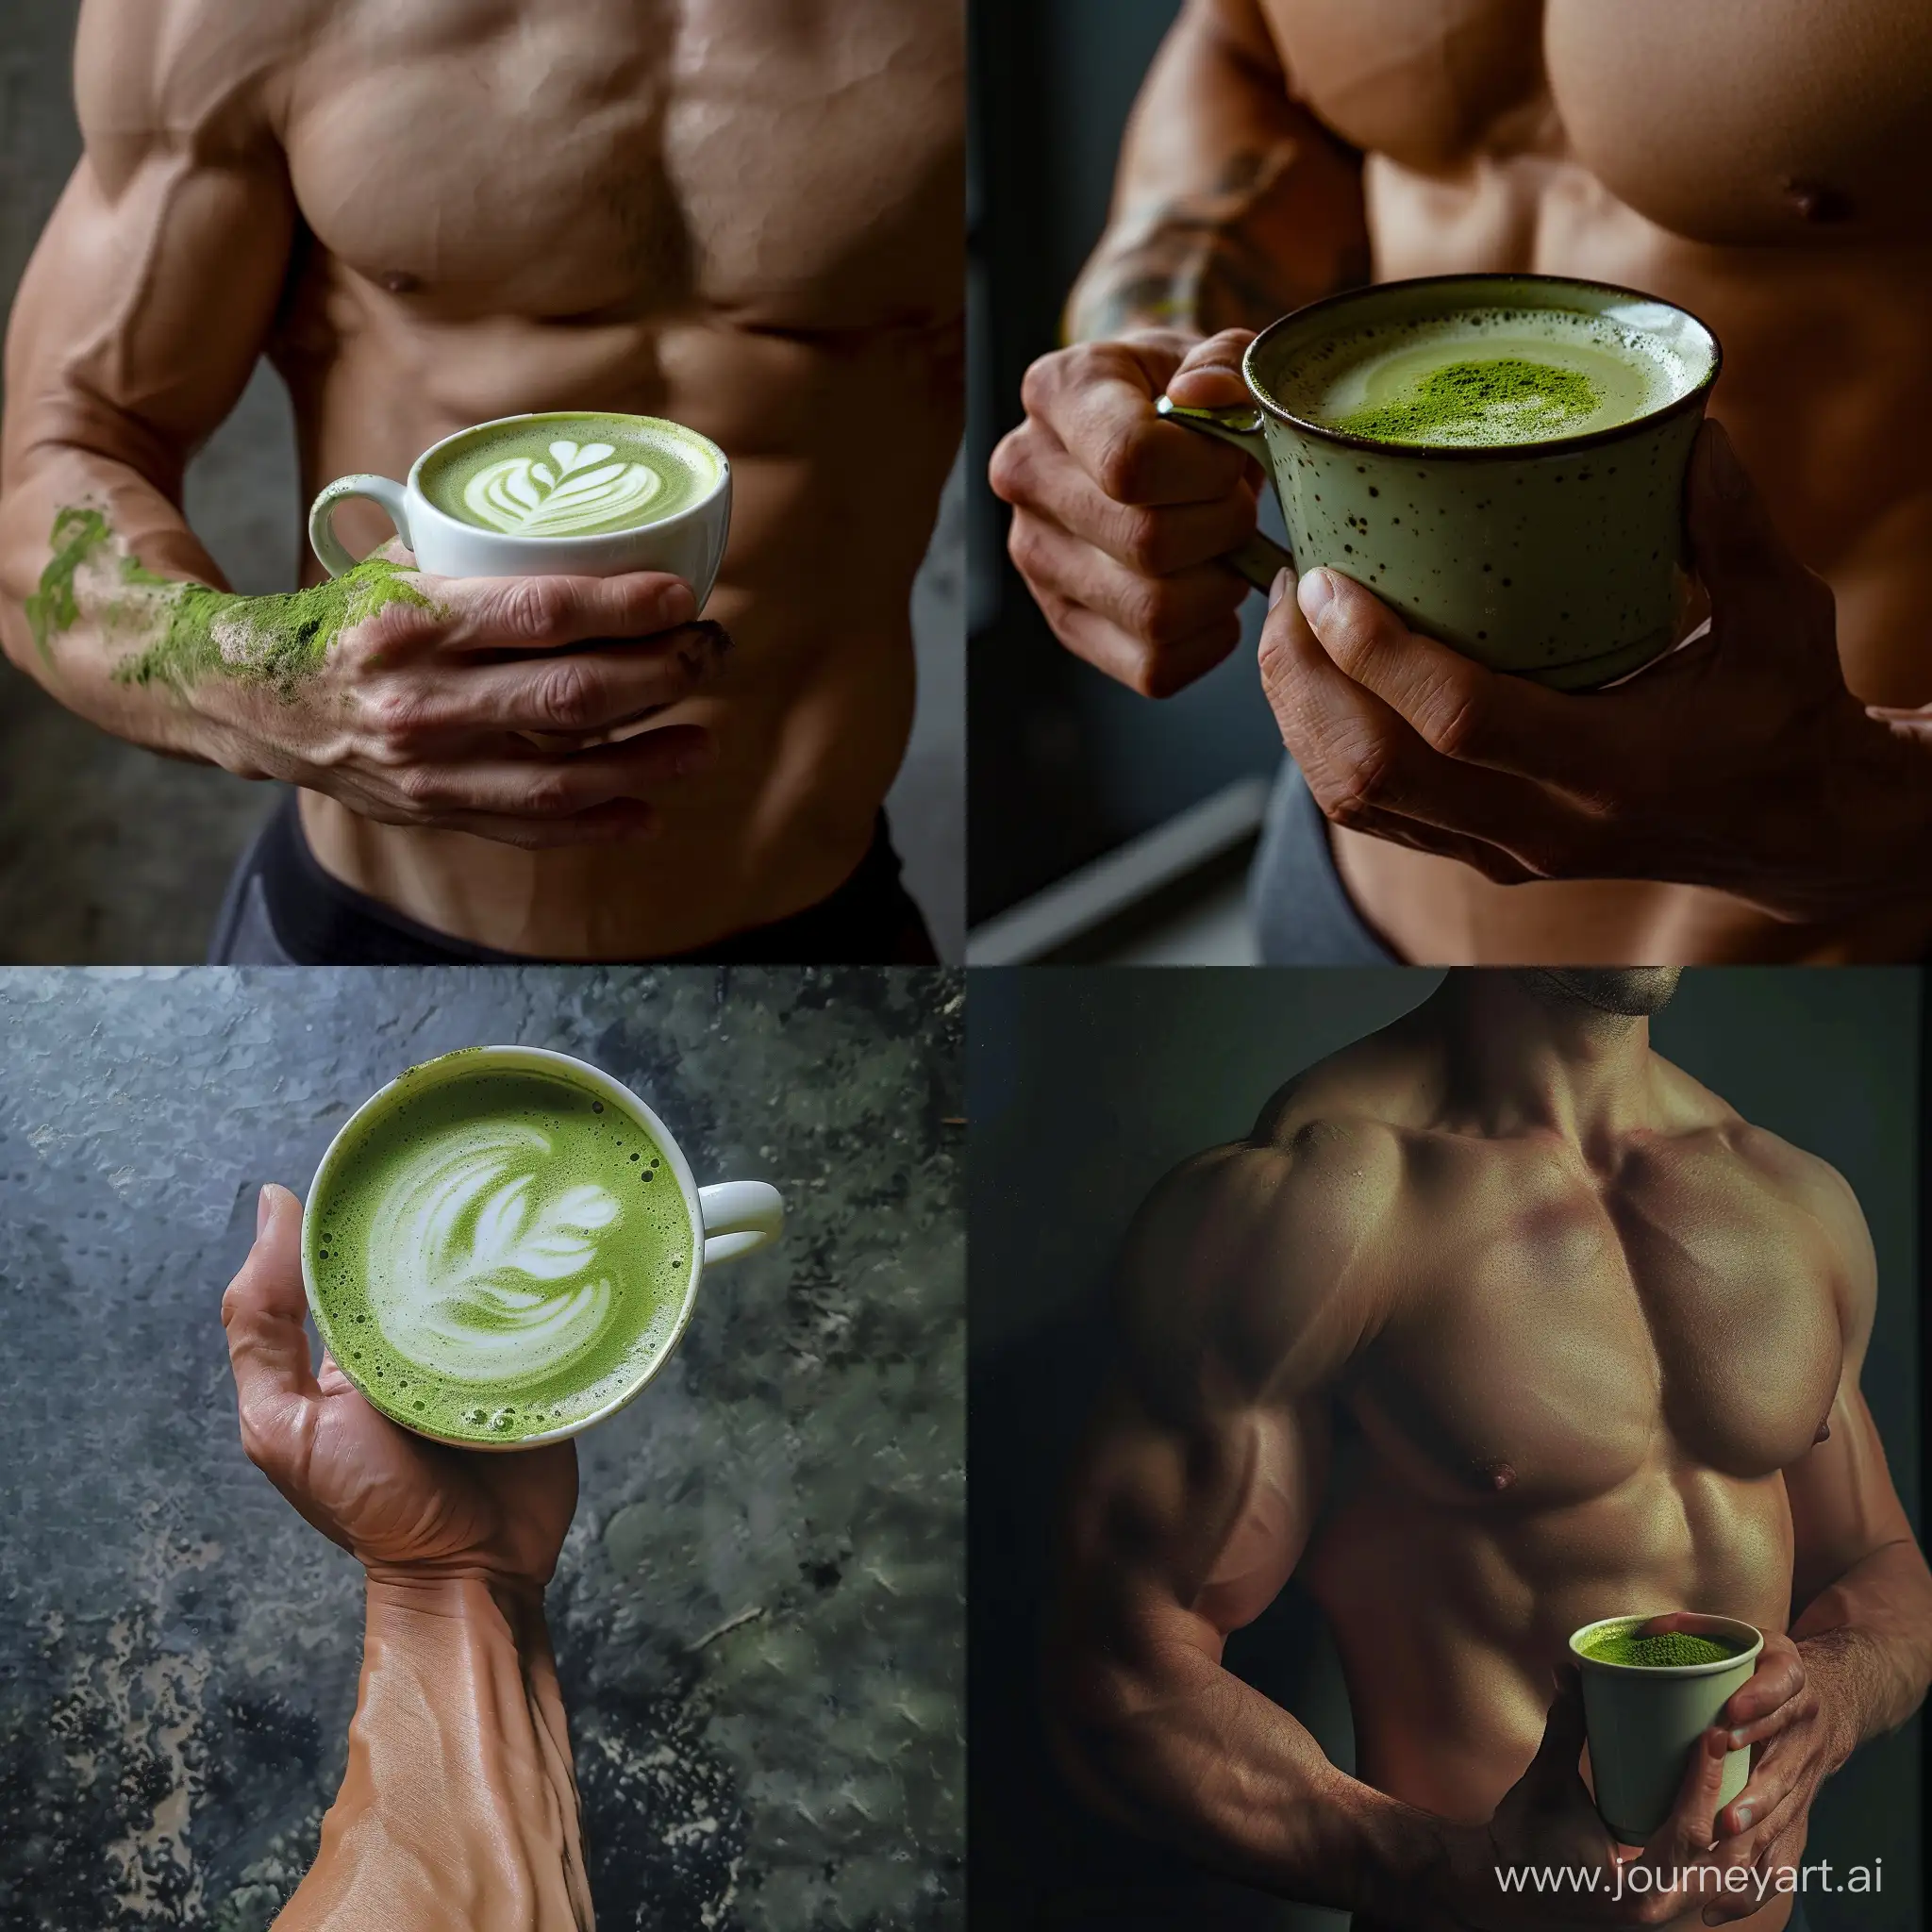 Real picture of a cup of matcha tea in the hand of a man with an athletic body. Complete and accurate details.